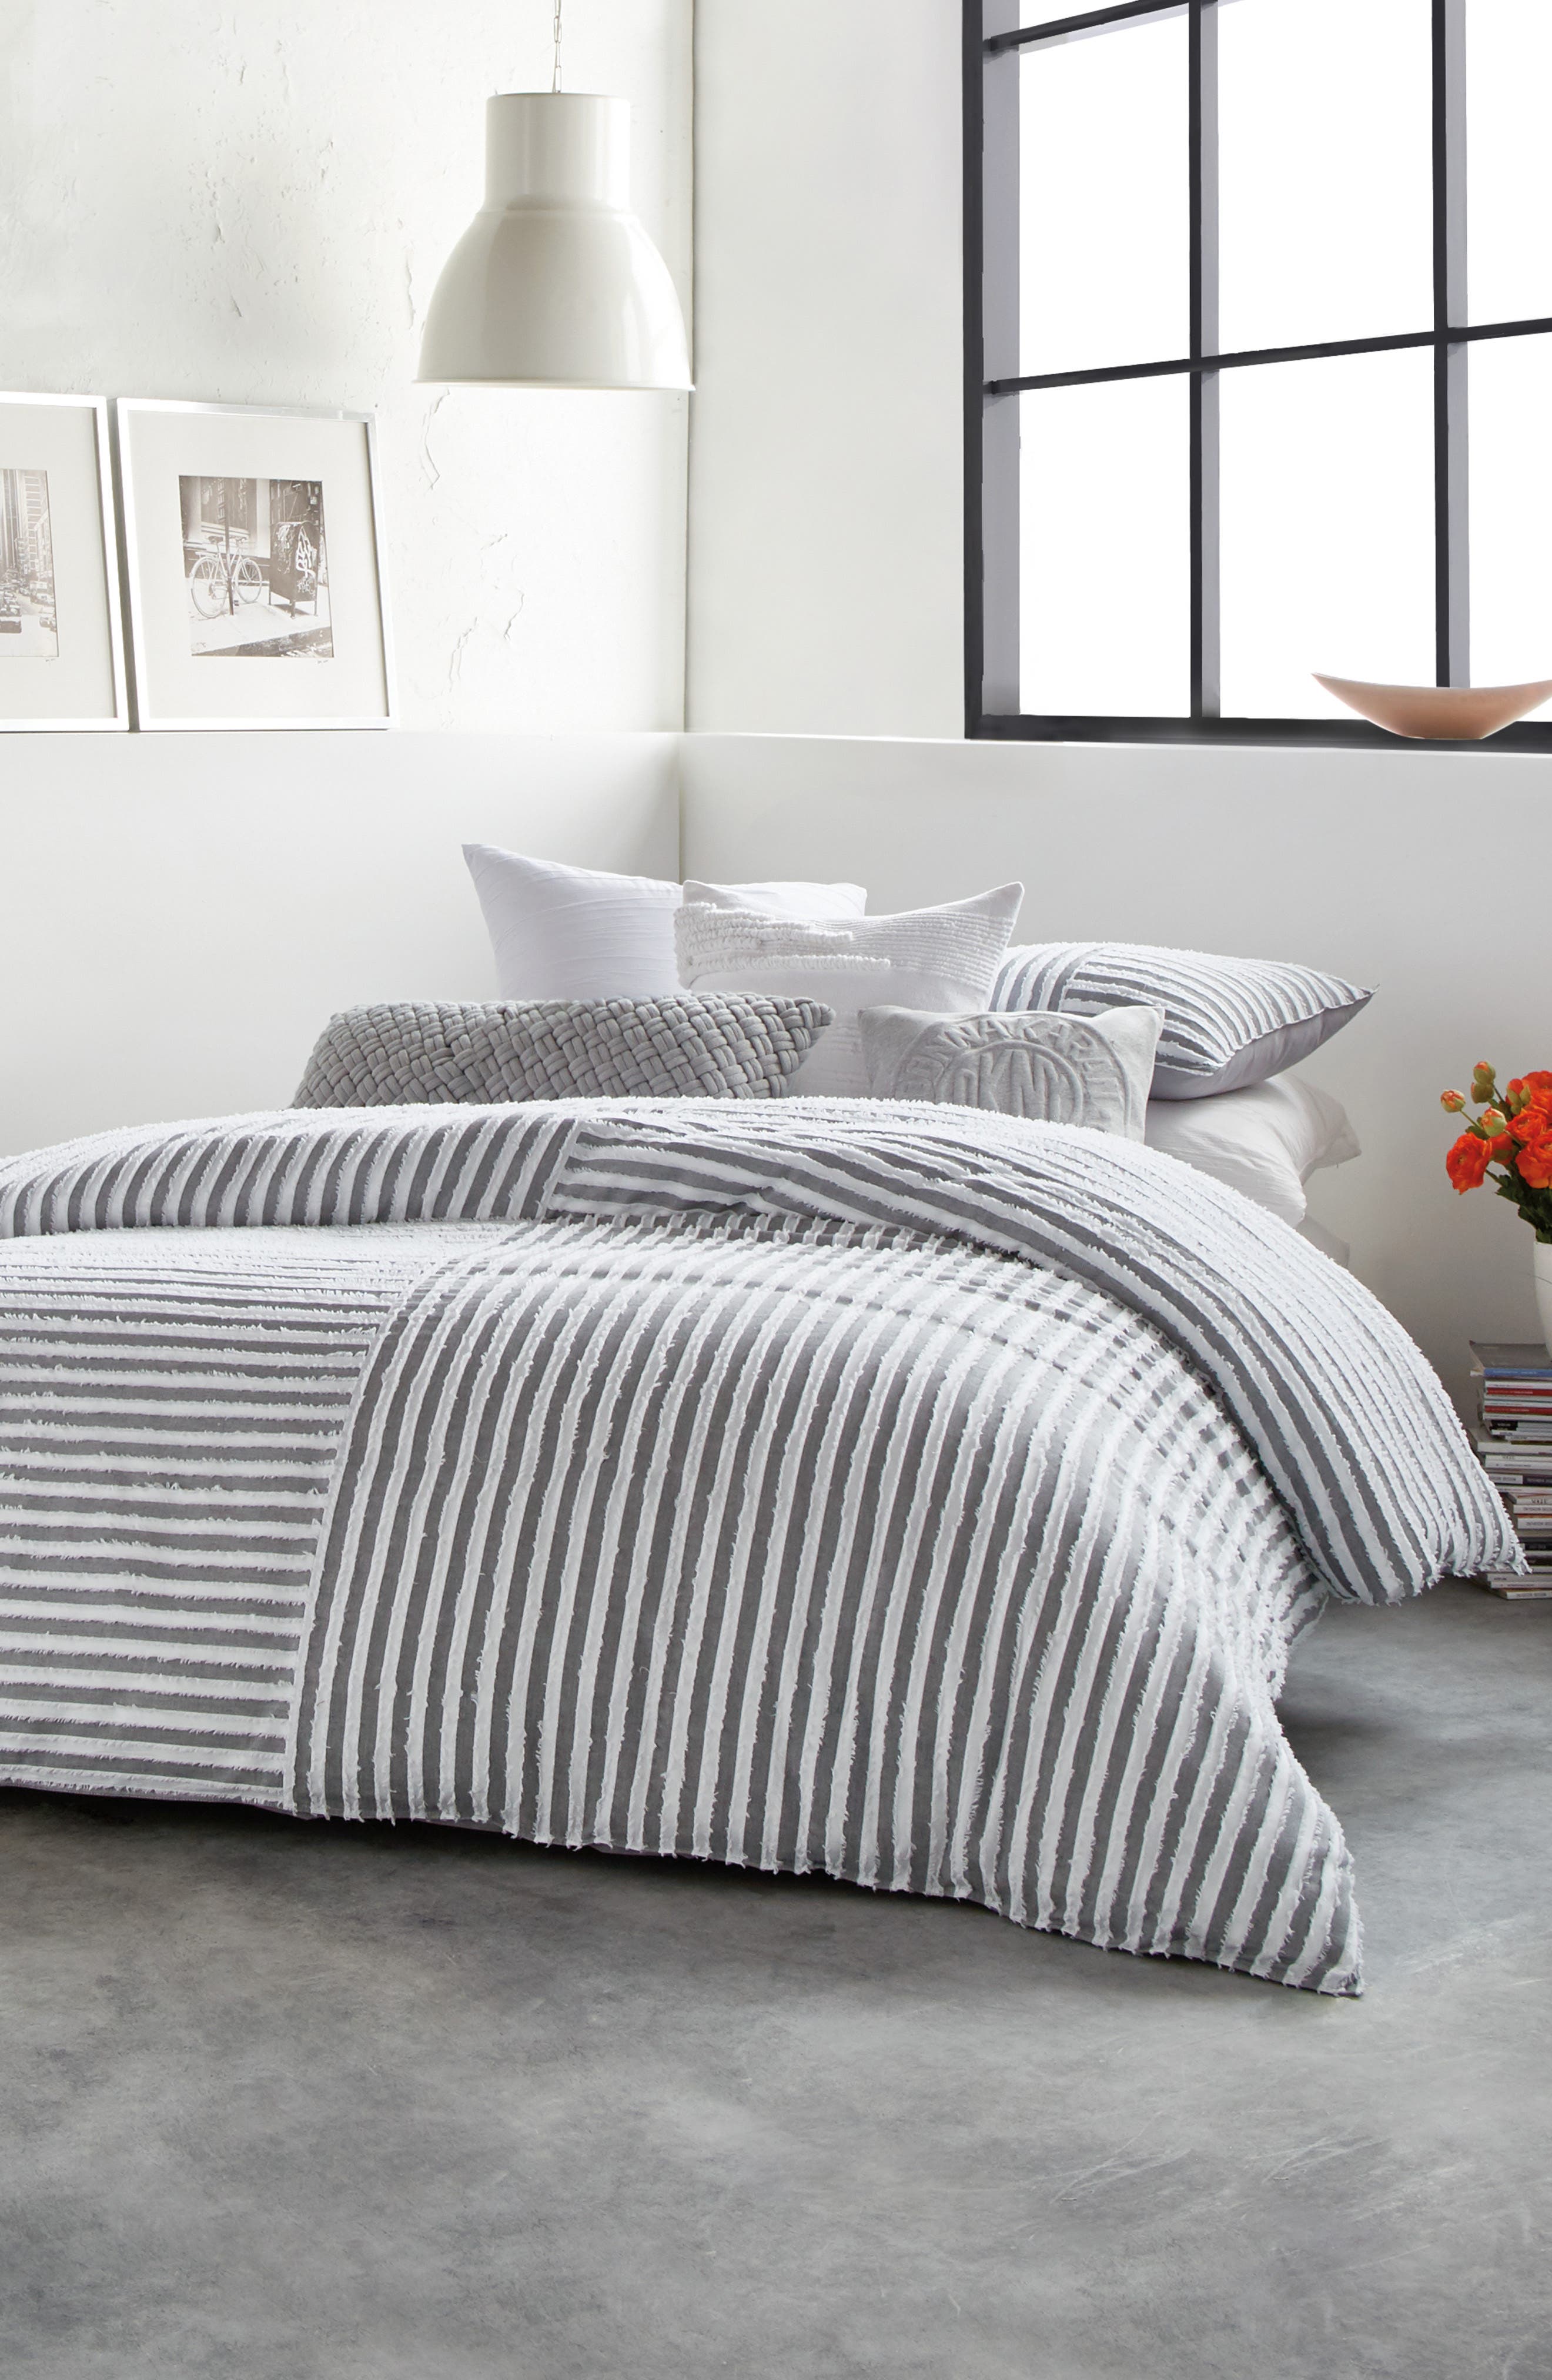 DKNY Clipped Square Cotton Comforter & Sham Set in Grey at Nordstrom, Size Queen